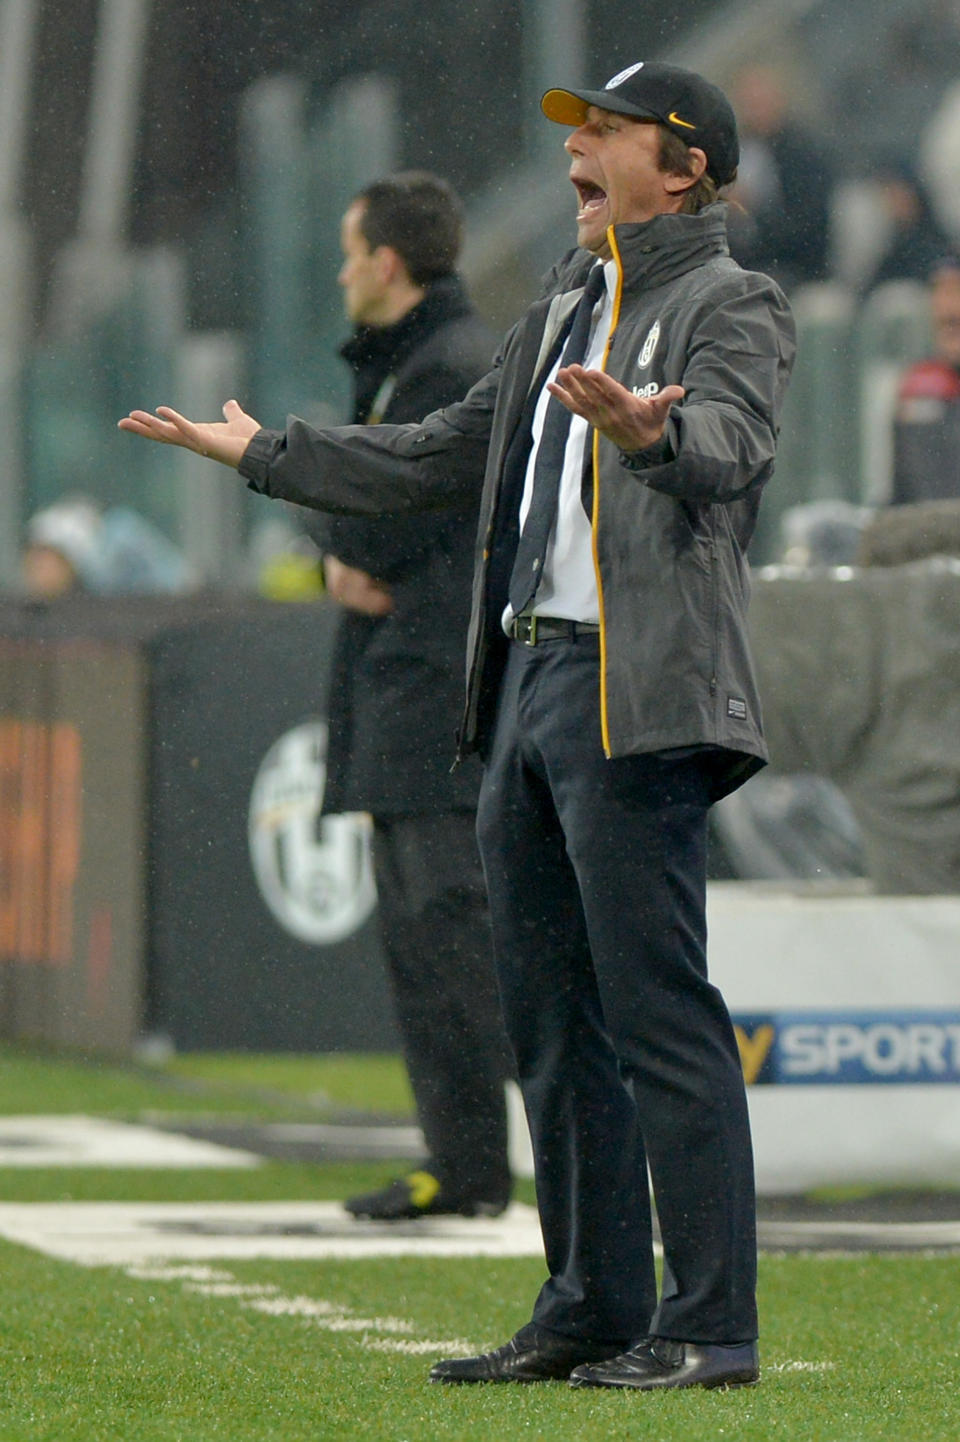 Juventus coach Antonio Conte shouts during a Serie A soccer match between Juventus and Bologna at the Juventus stadium, in Turin, Italy, Saturday, April 19, 2014. (AP Photo/Massimo Pinca)